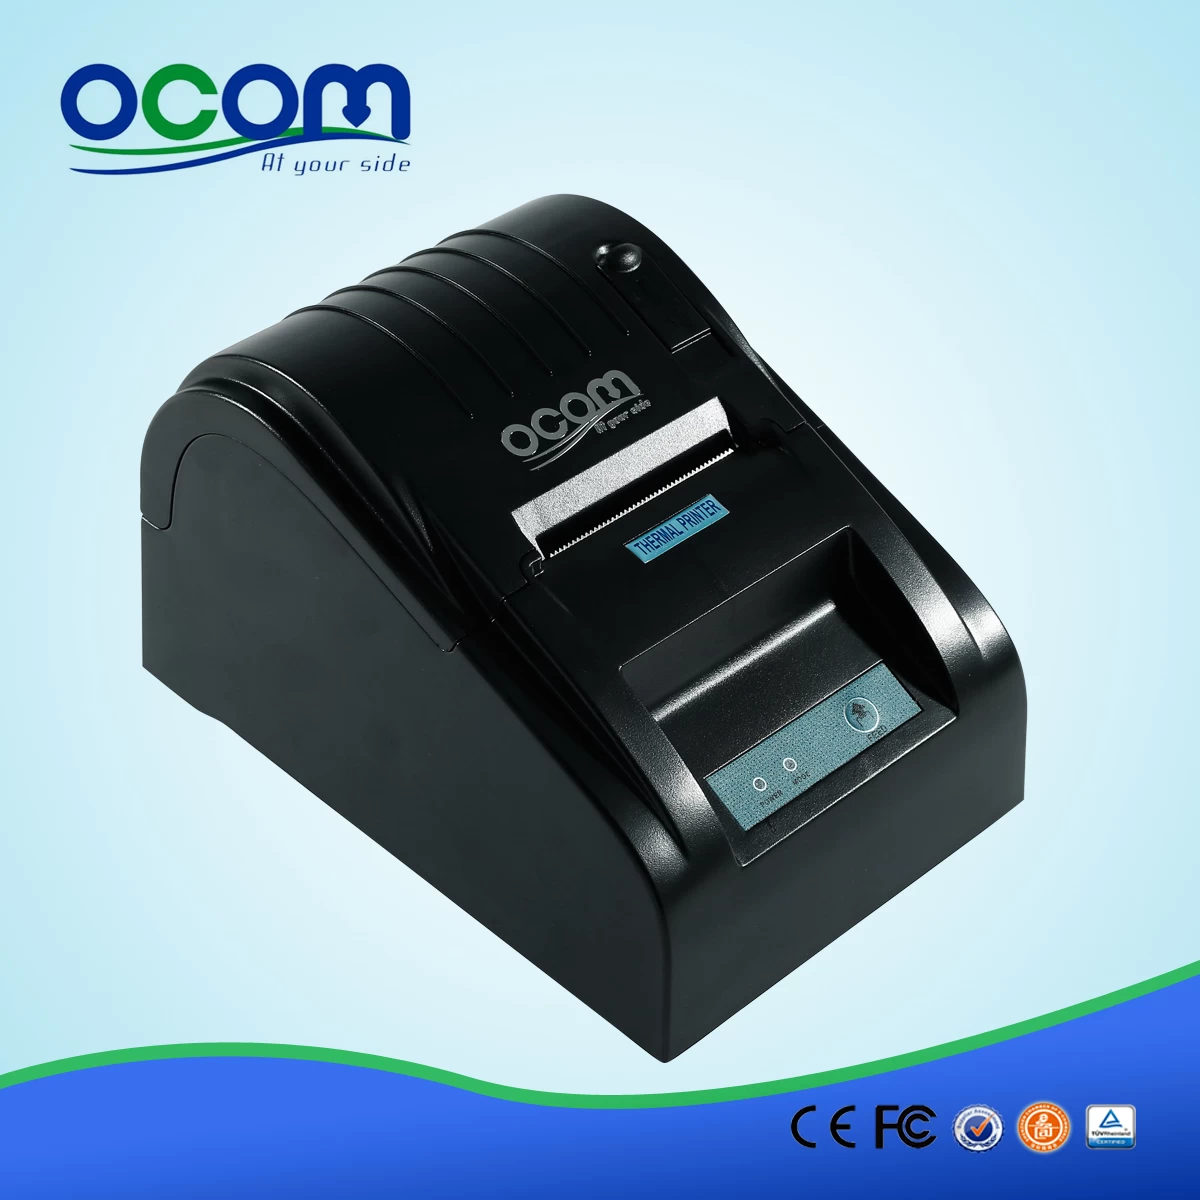 China made cheap Android 58mm thermal receipt printer-OCPP-585